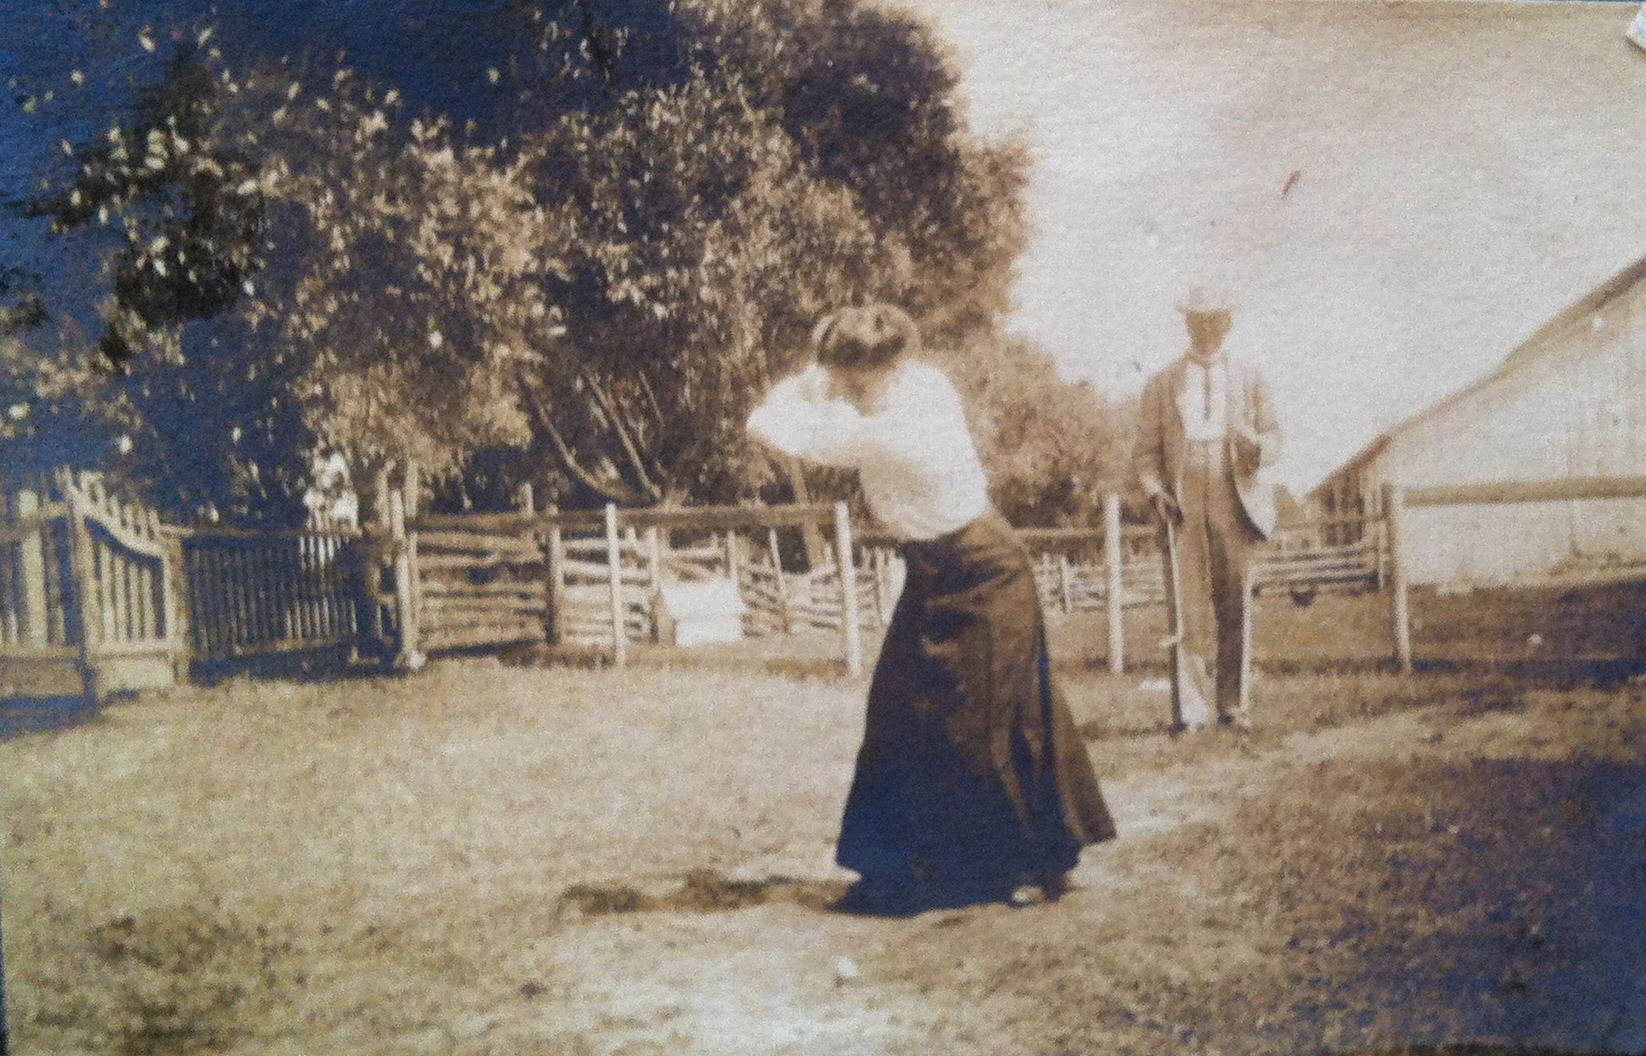 A woman swinging to hit a golf ball while a man waits in the background.